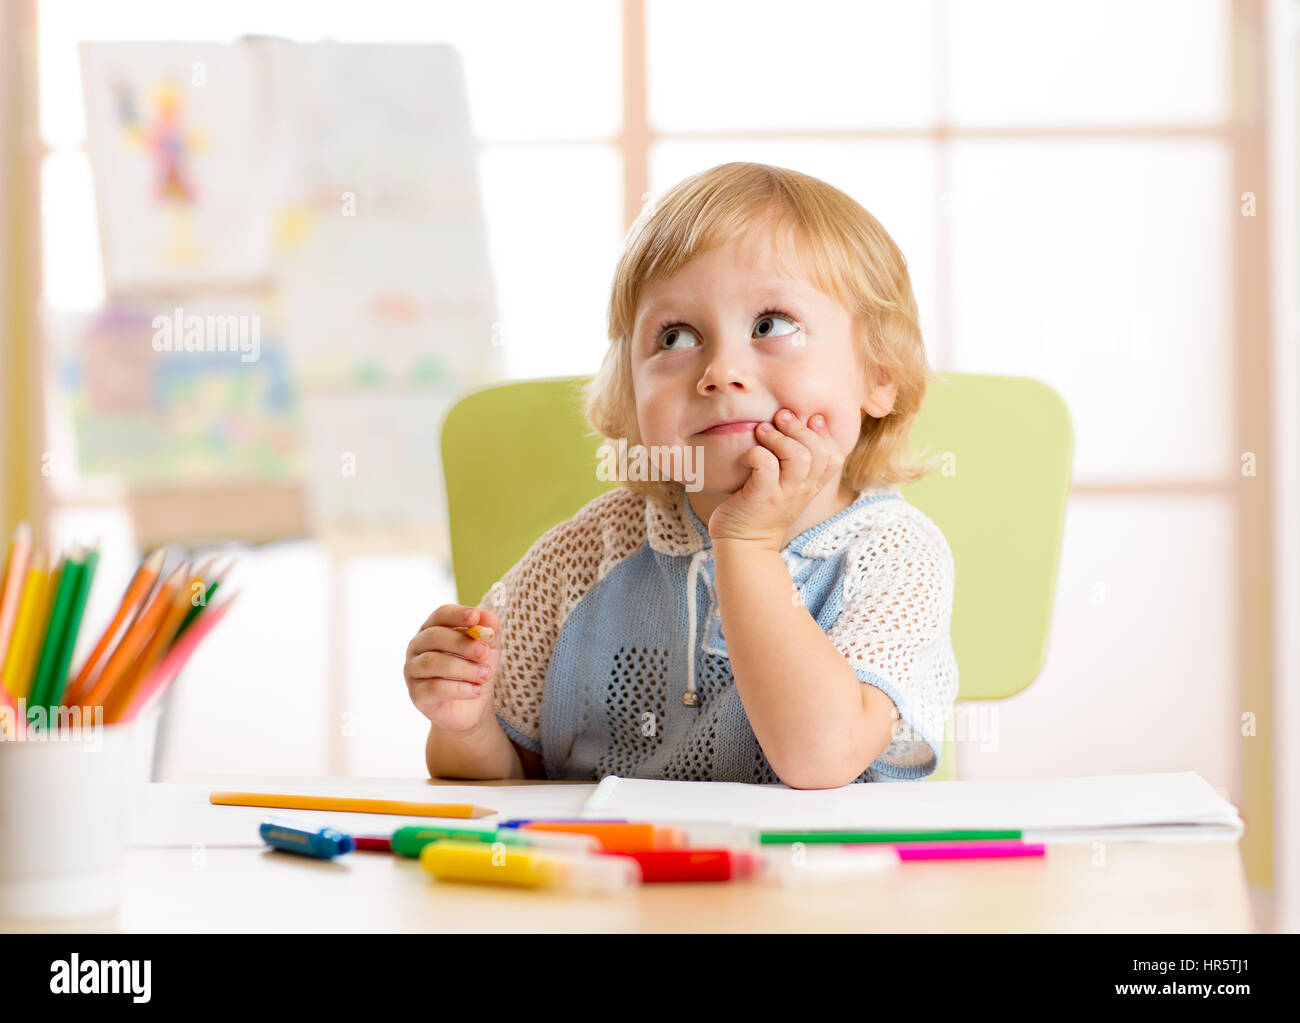 Smiling kid drawing with color pencils in daycare center Stock Photo